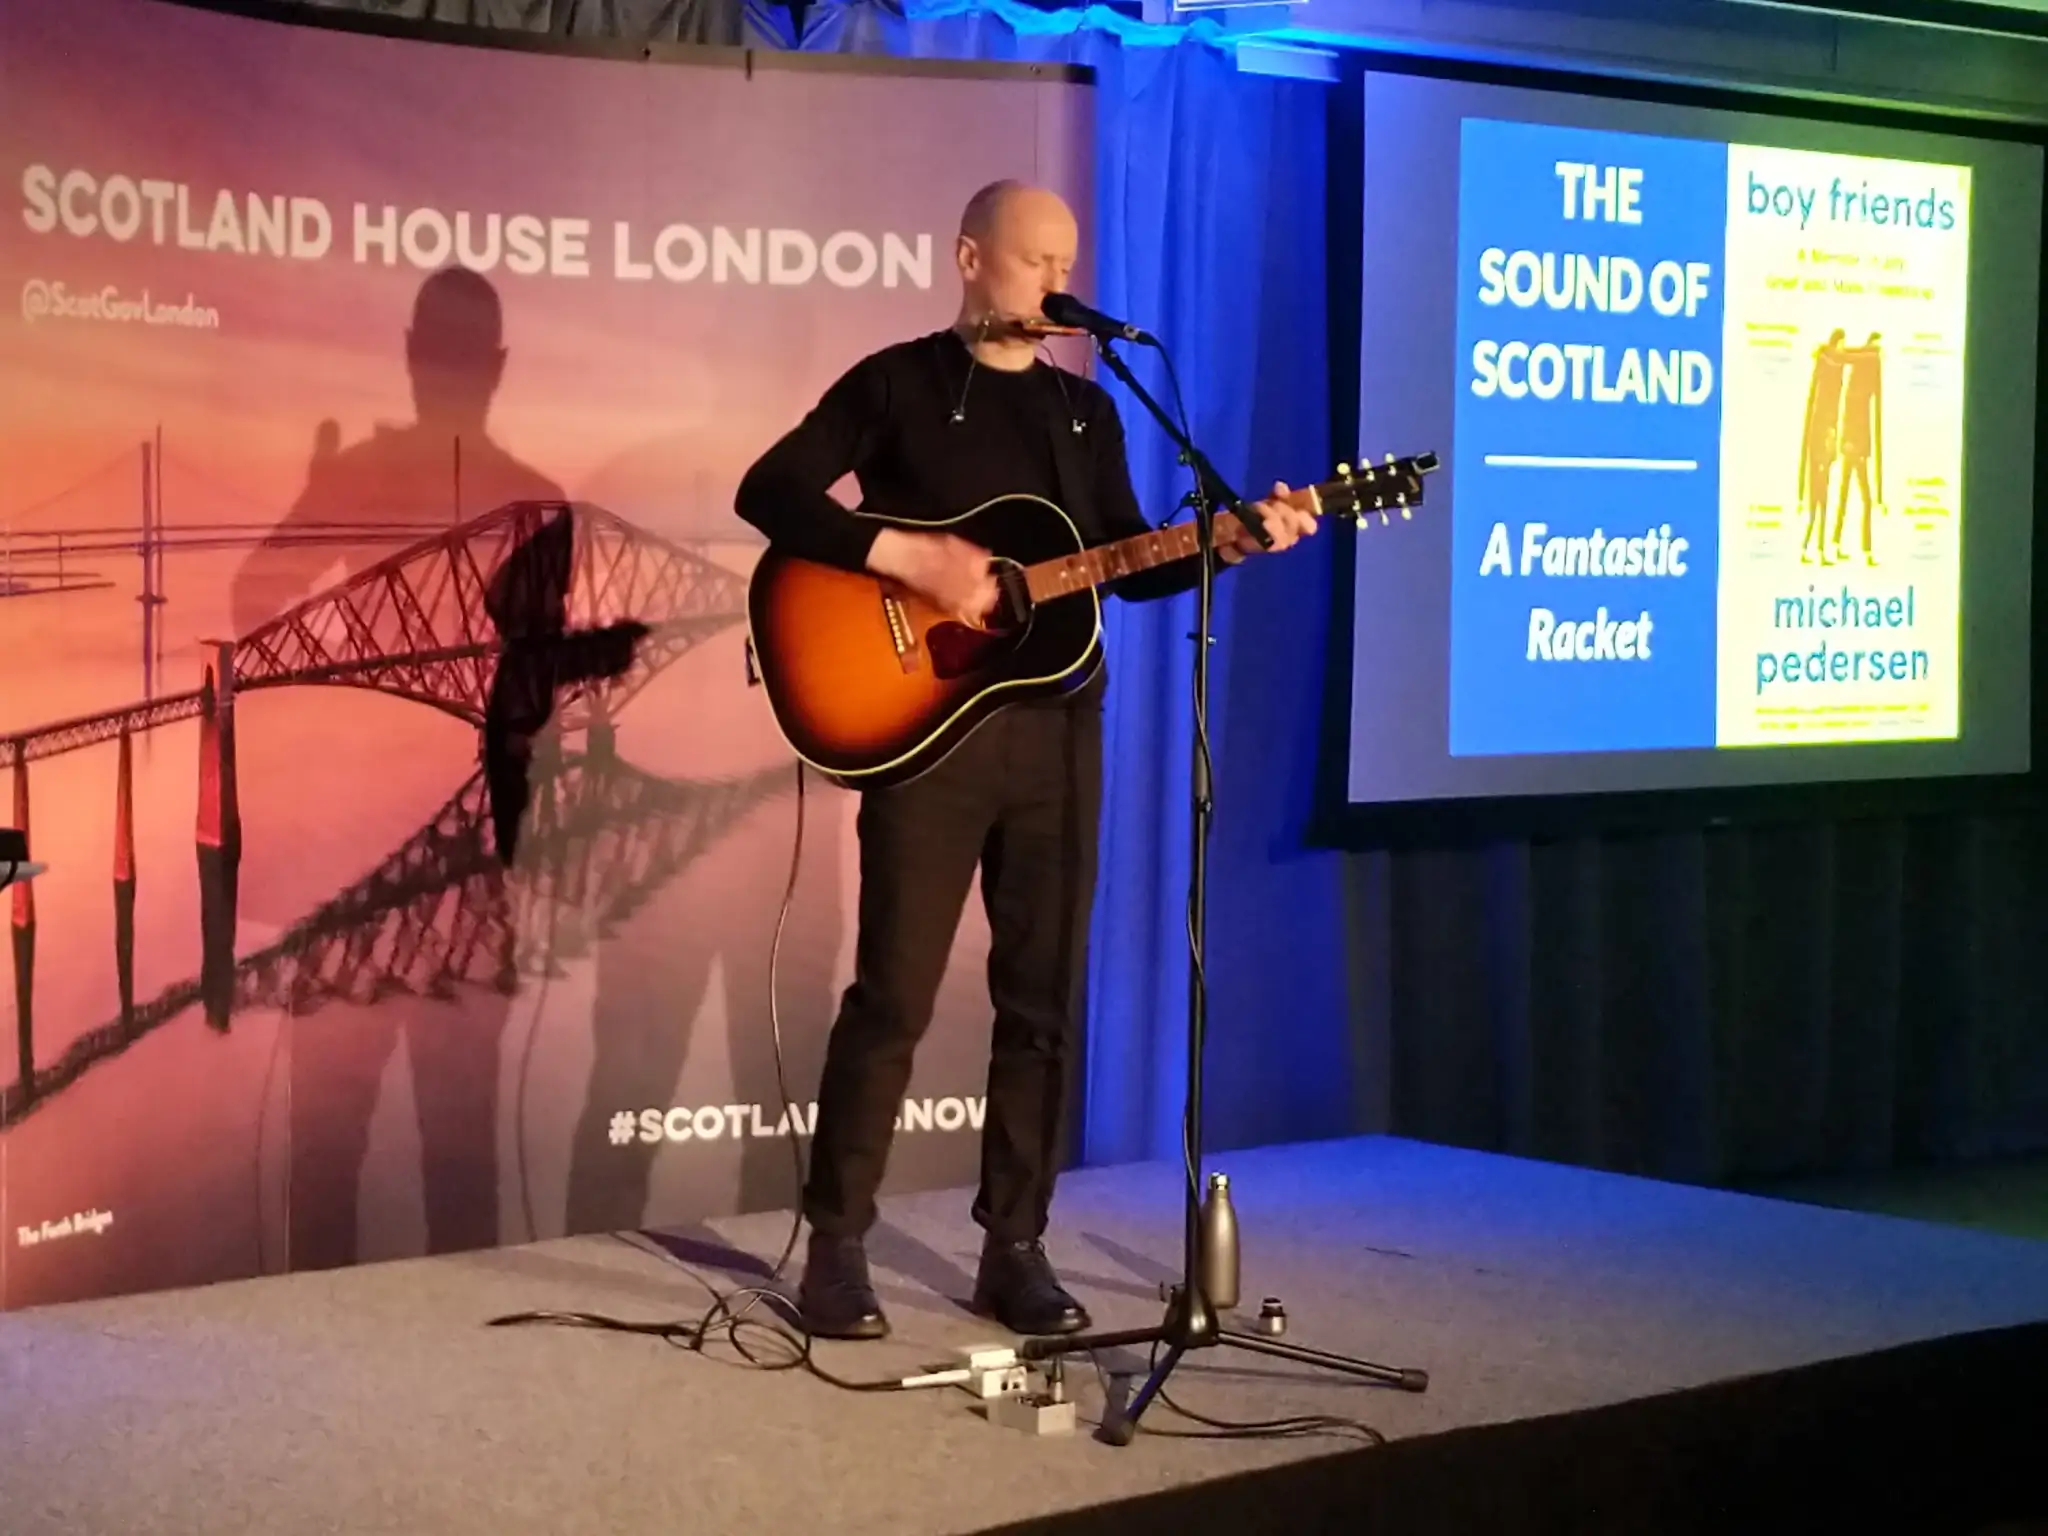 A man, dressed all in black, plays an acoustic guitar on stage, and leans
forward to sing into the microphone. Behind him, banners read 'Scotland House
London' and 'The Sound of Scotland: A Fantastic Racket'.